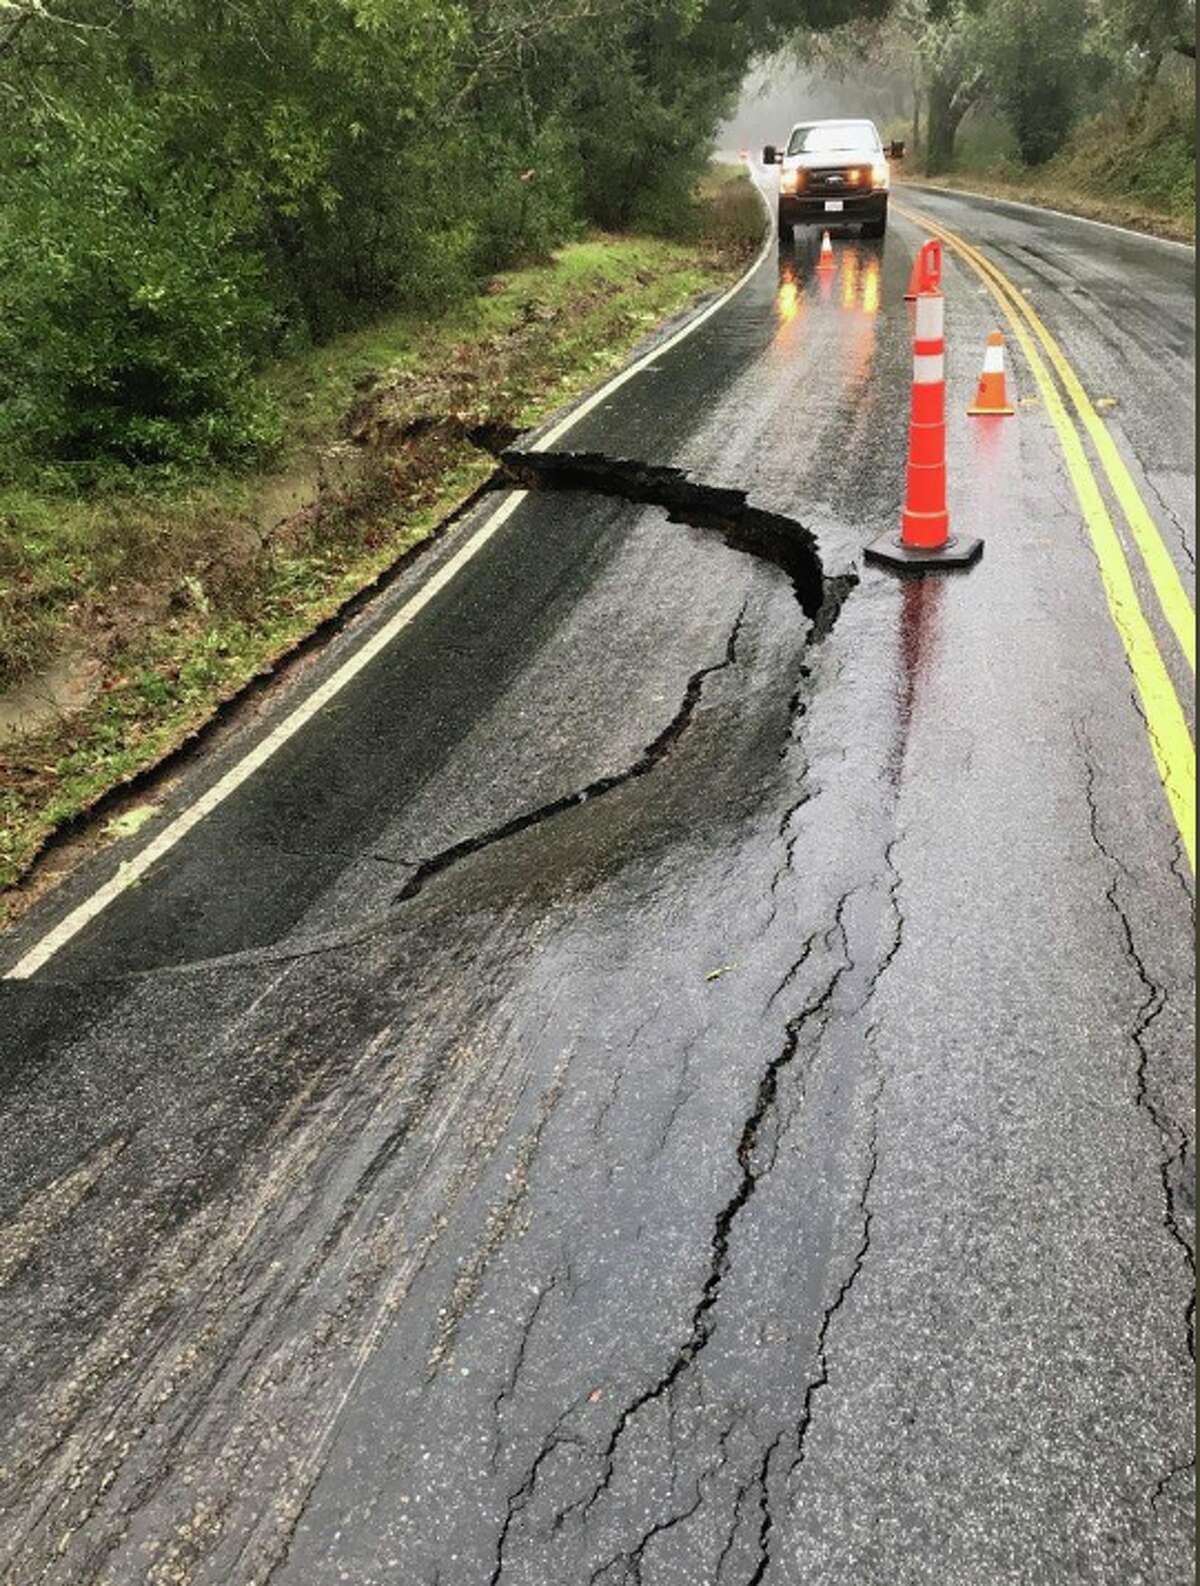 A sinkhole forced the closure of State Route 35, or Skyline Boulevard, on the San Mateo/Santa Clara County border on Feb. 4, 2019.